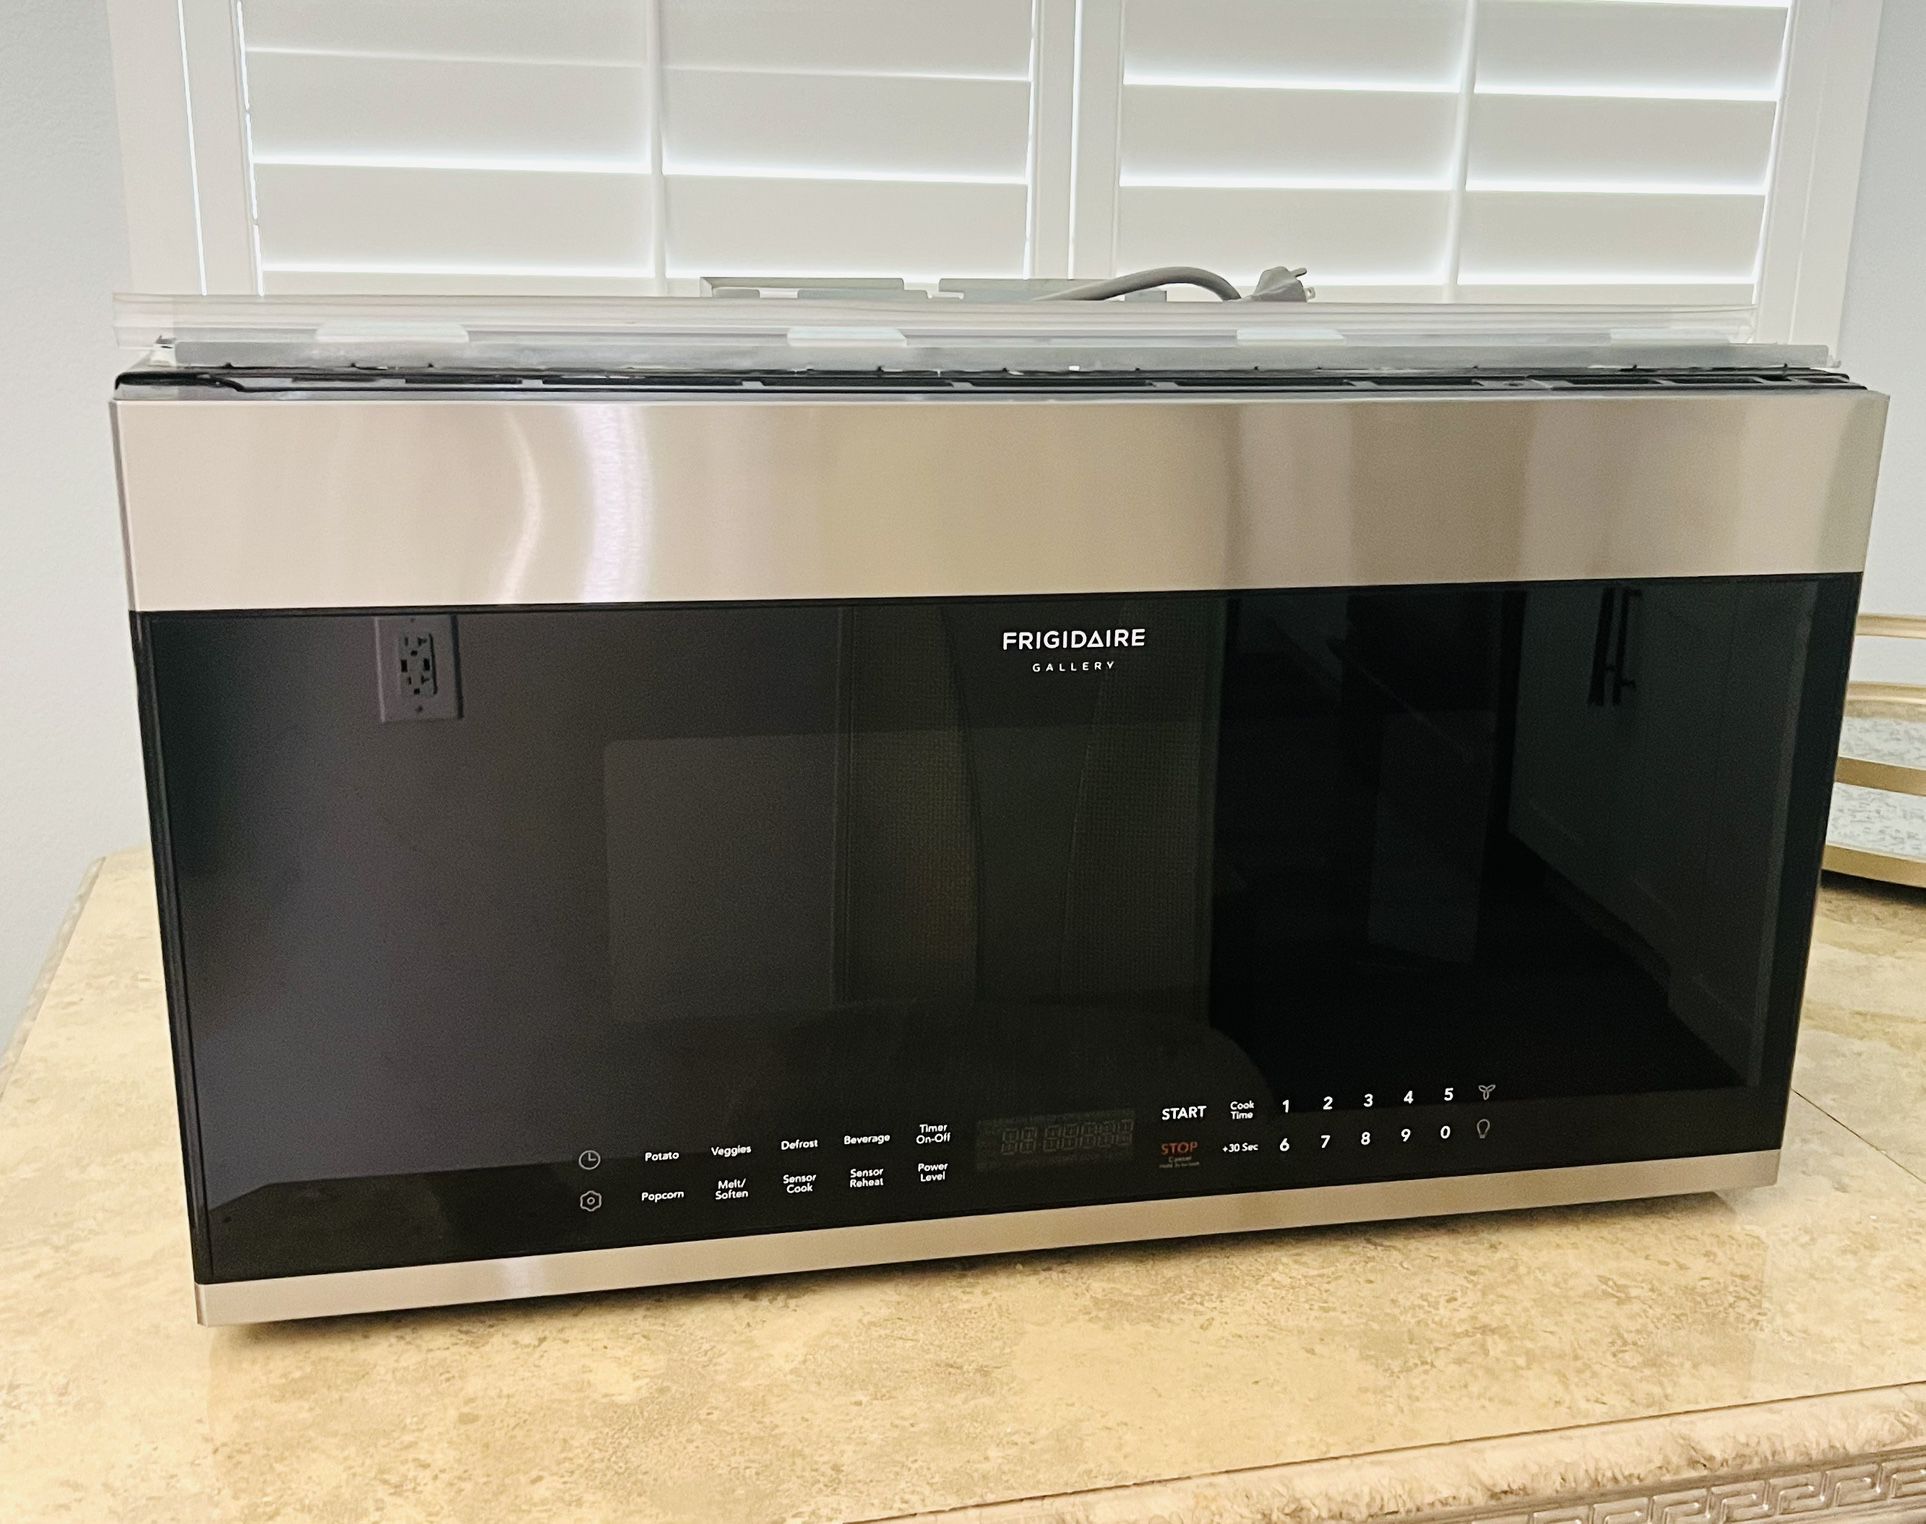 Microwave Frigidaire. Gallery over the range 